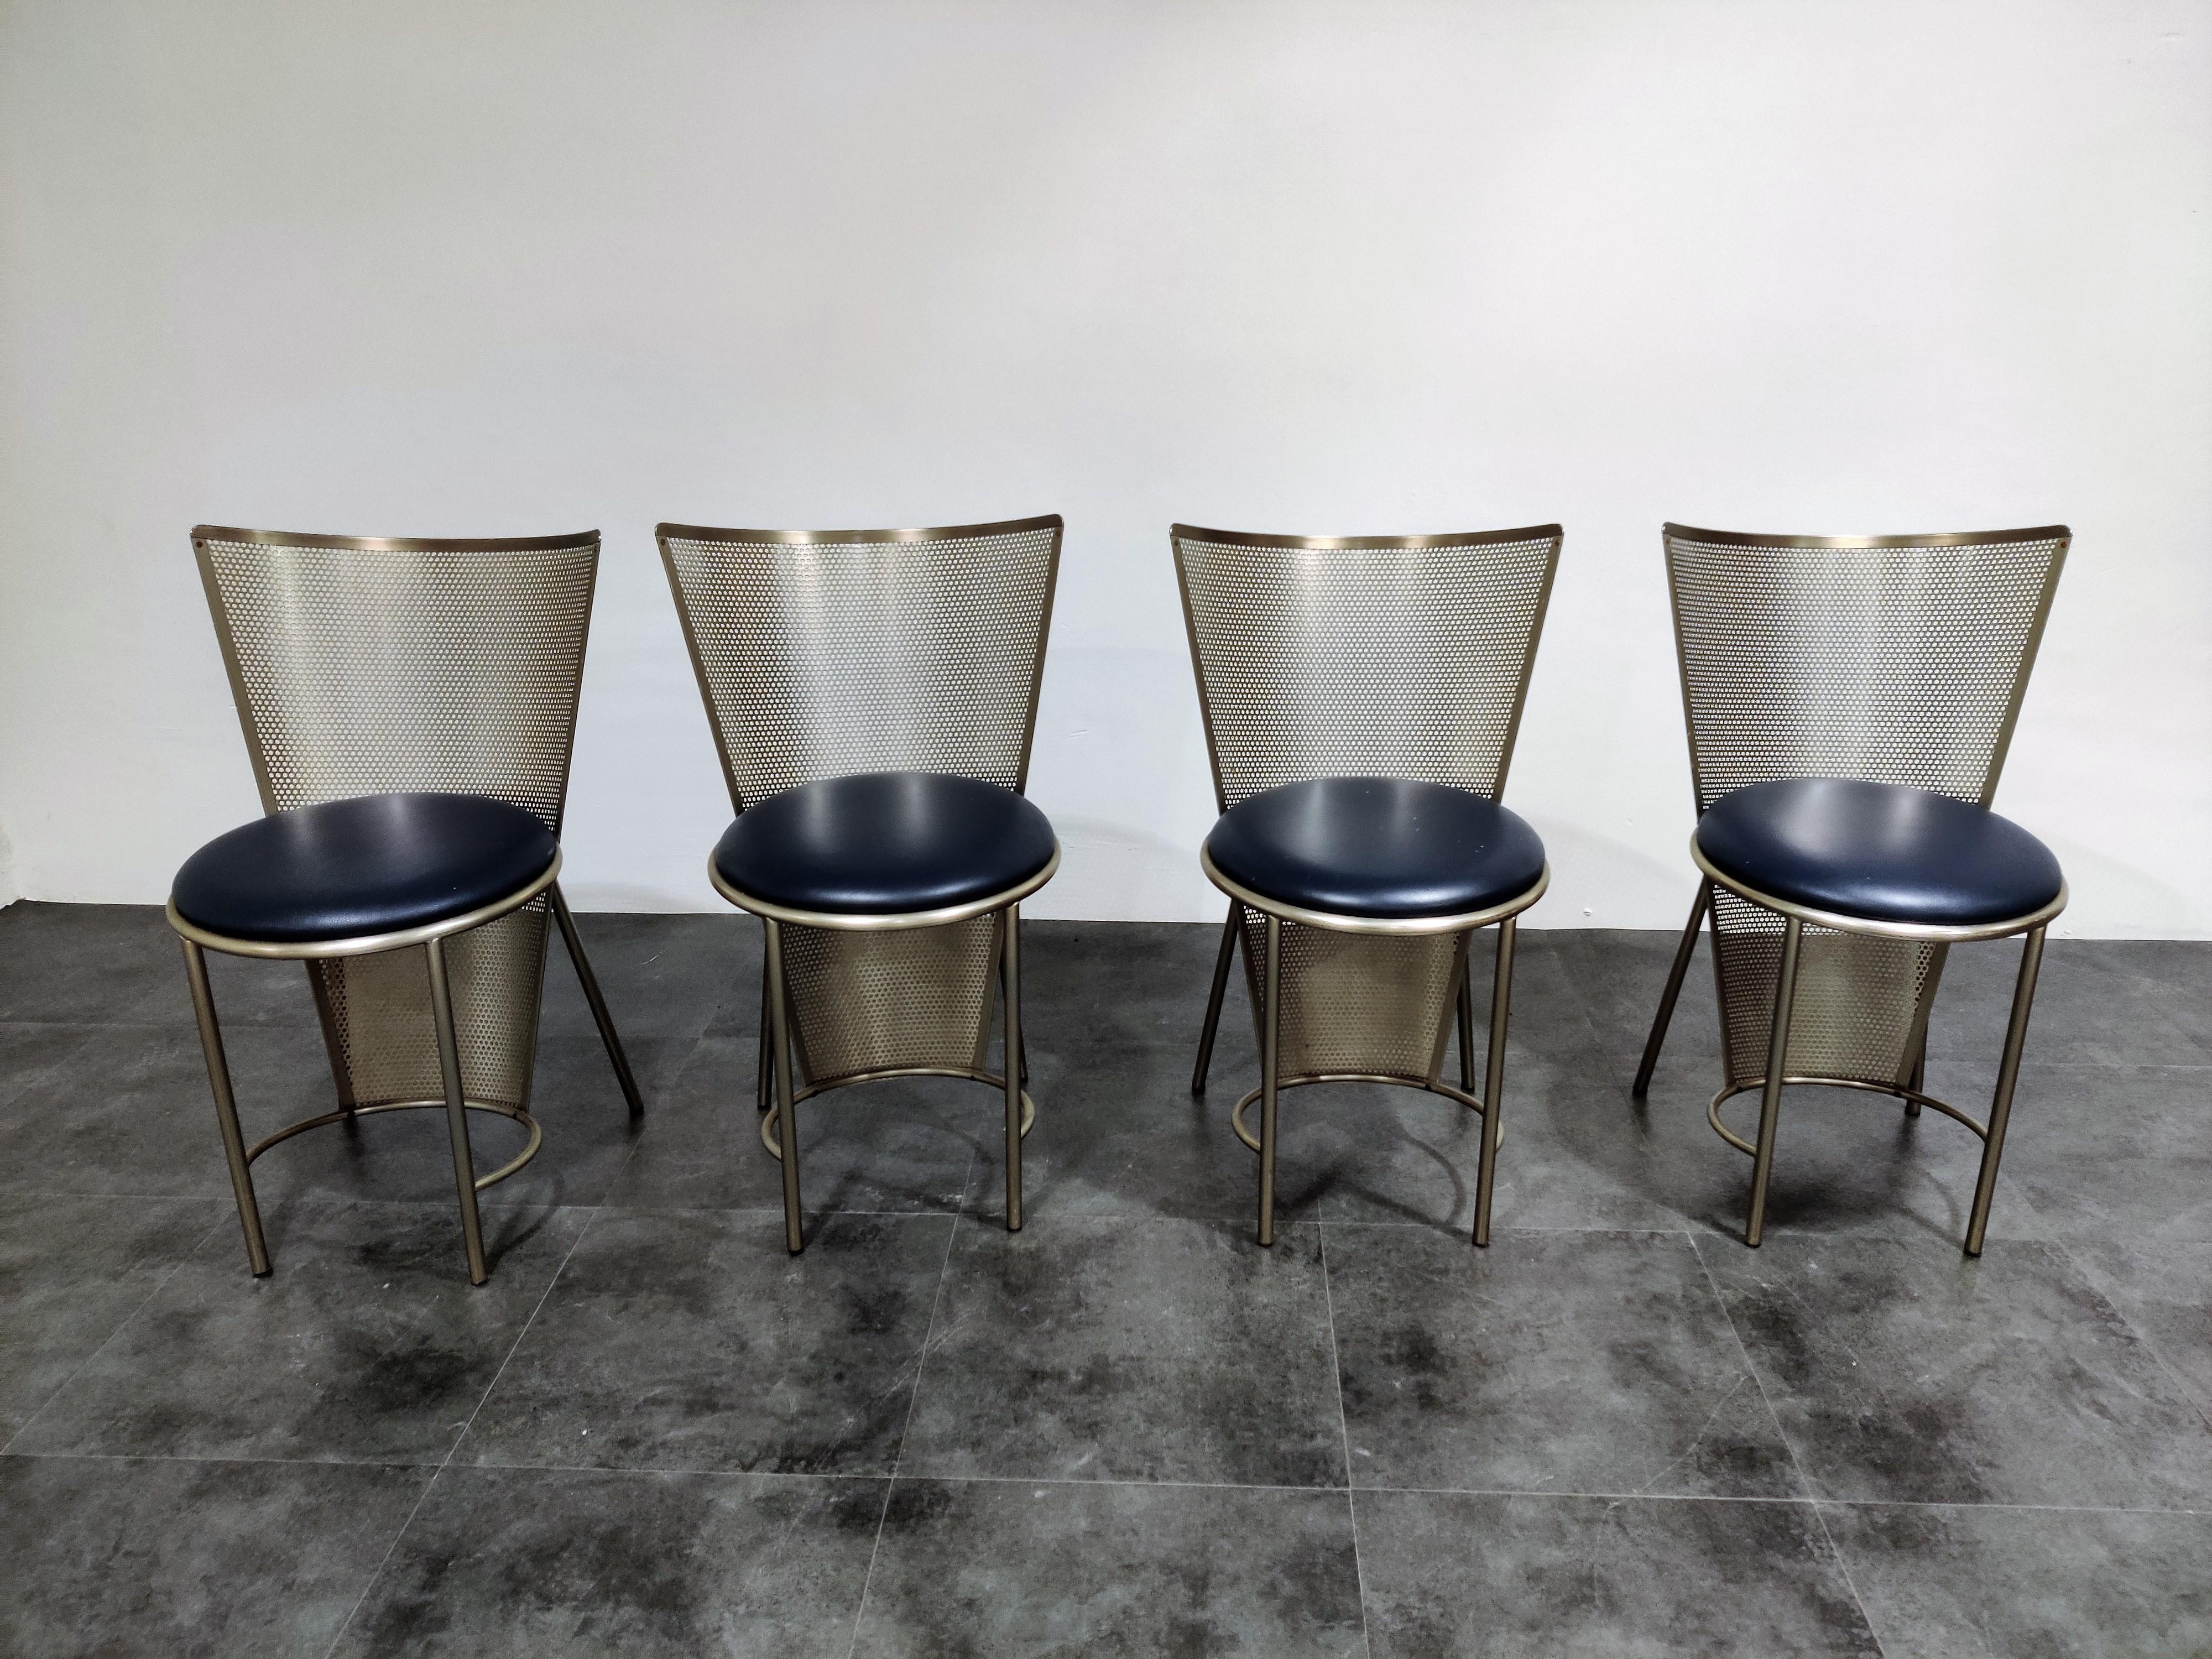 Set of four perforated metal dining chairs designed by Frans Van Praet for belgochrom.

These chairs where designed for the world expo of 1992 in Sevilla.

The chairs have a beautiful geometric design and the seats have blue upholstery.

The